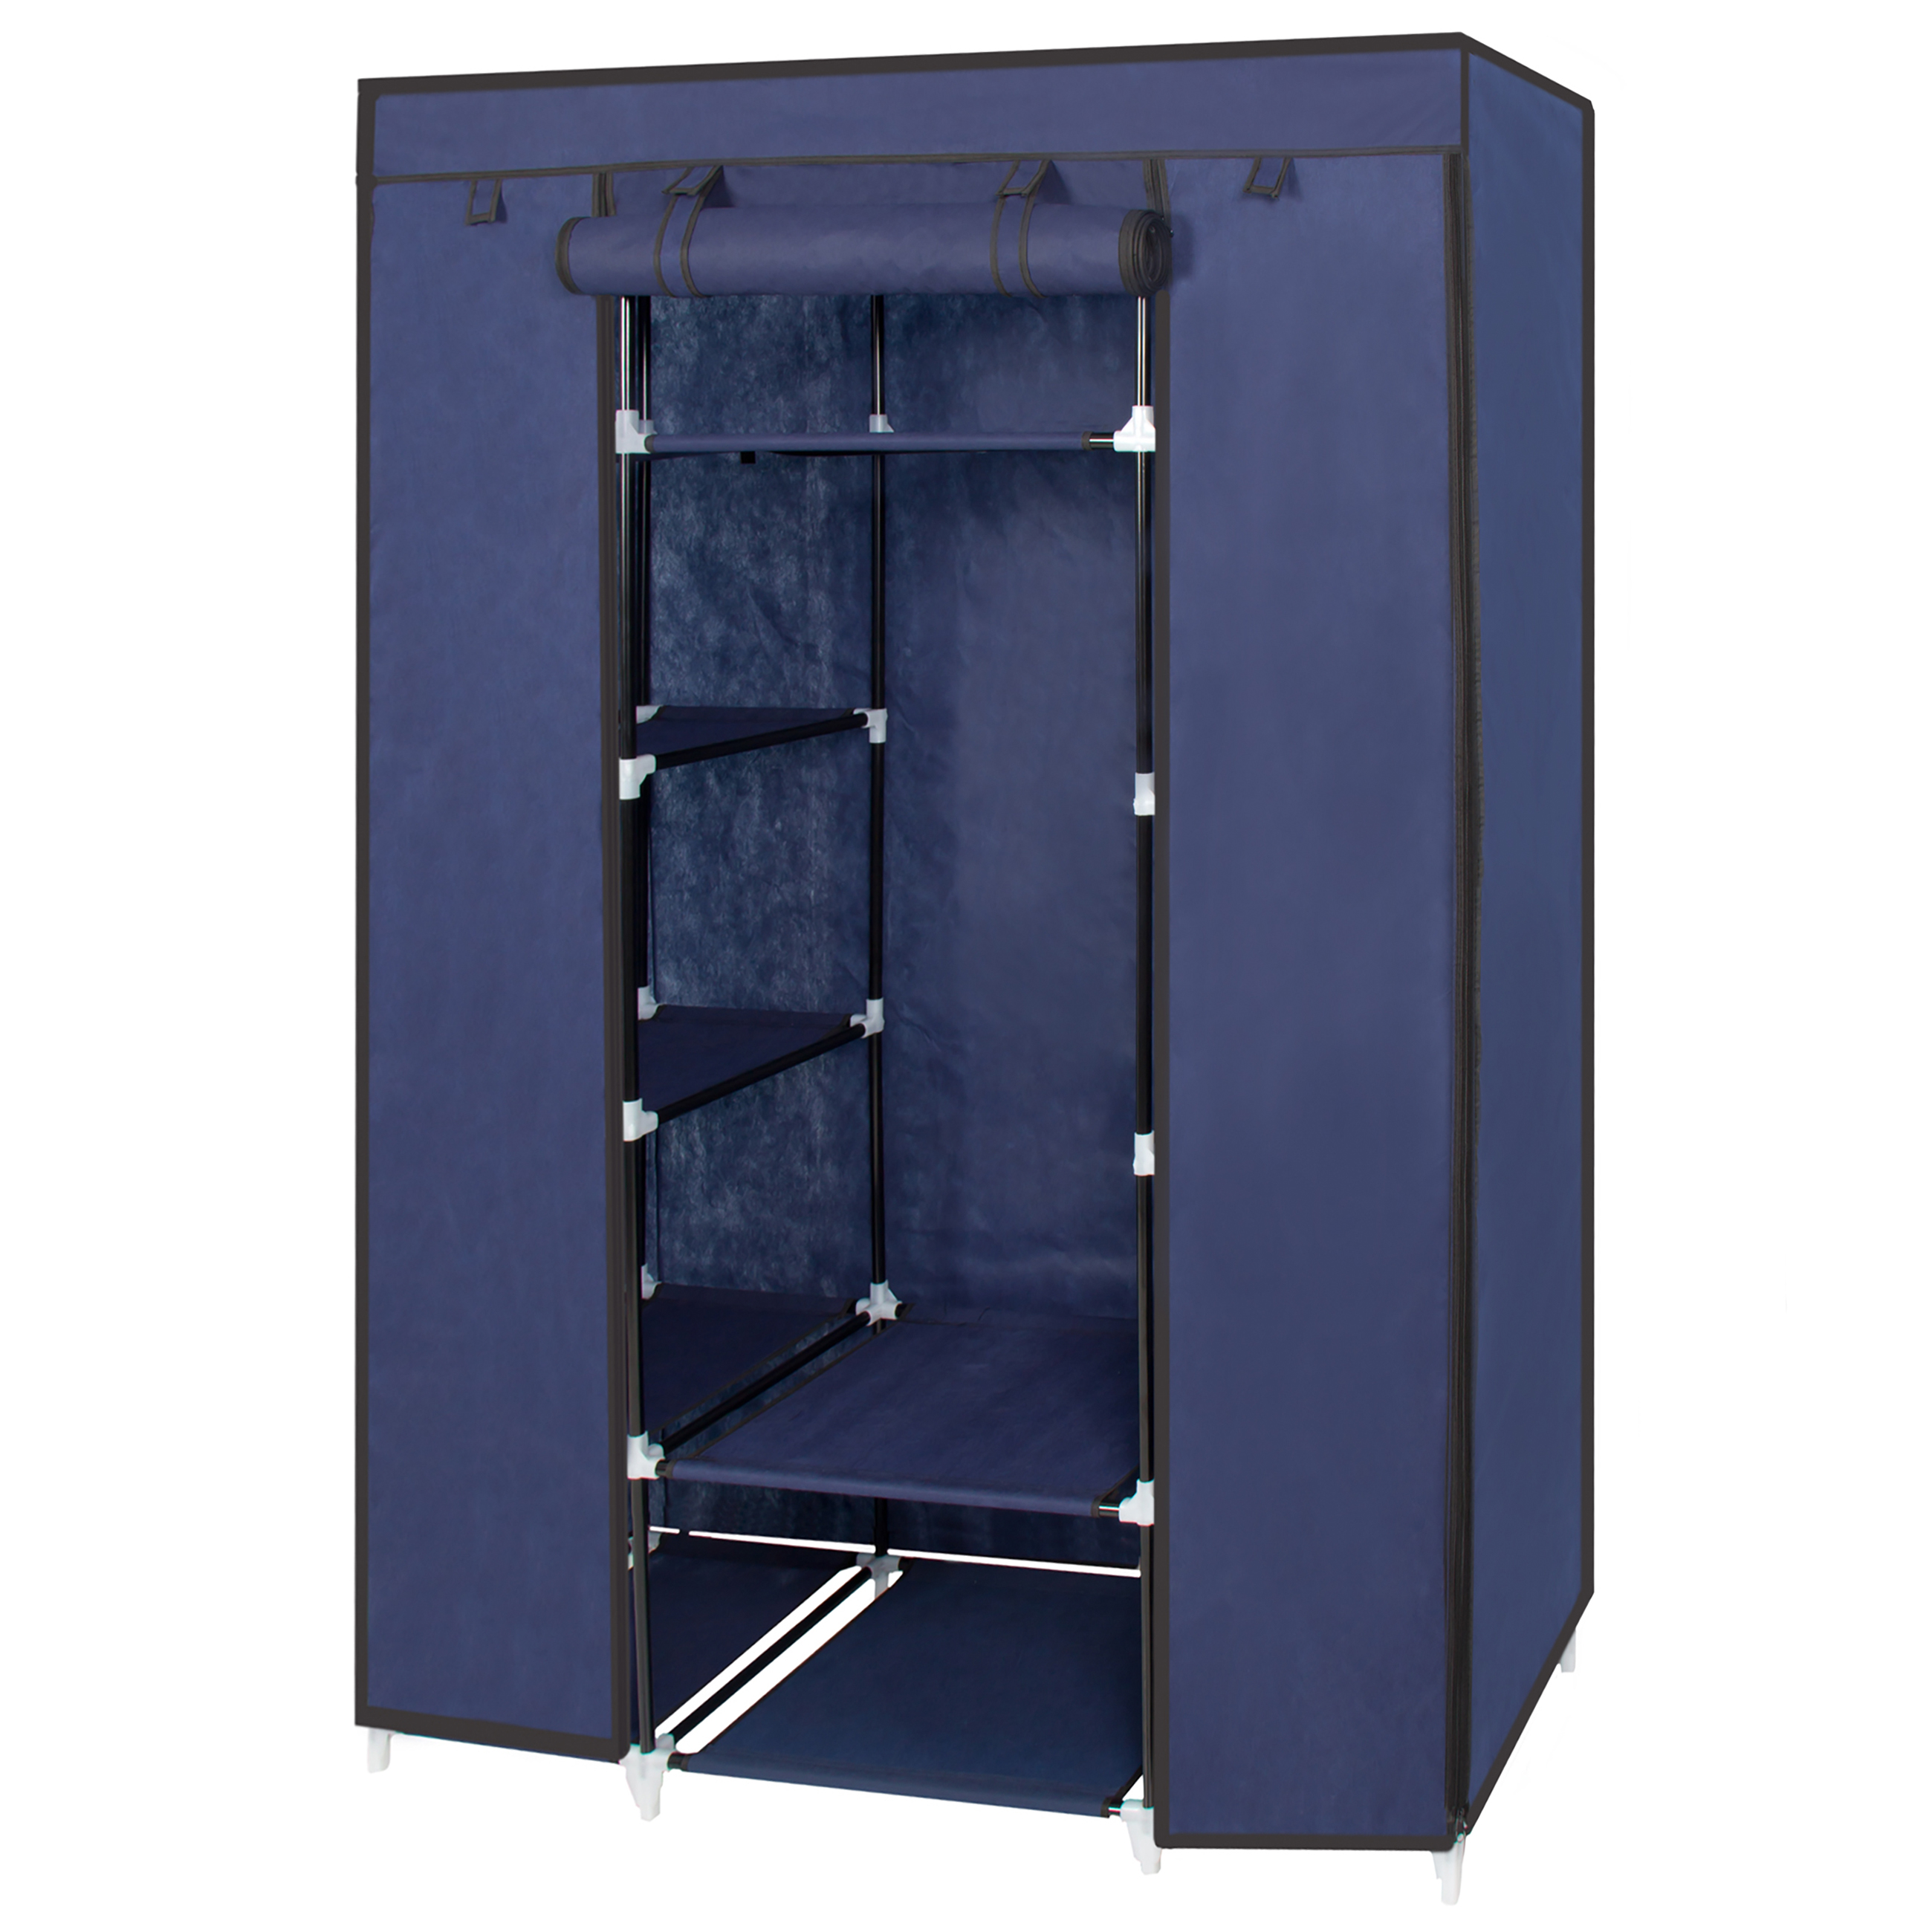 Best Choice Products 13-Shelf Portable Fabric Closet Wardrobe Storage Organizer w/ Cover and Hanging Rod - Blue - image 2 of 5